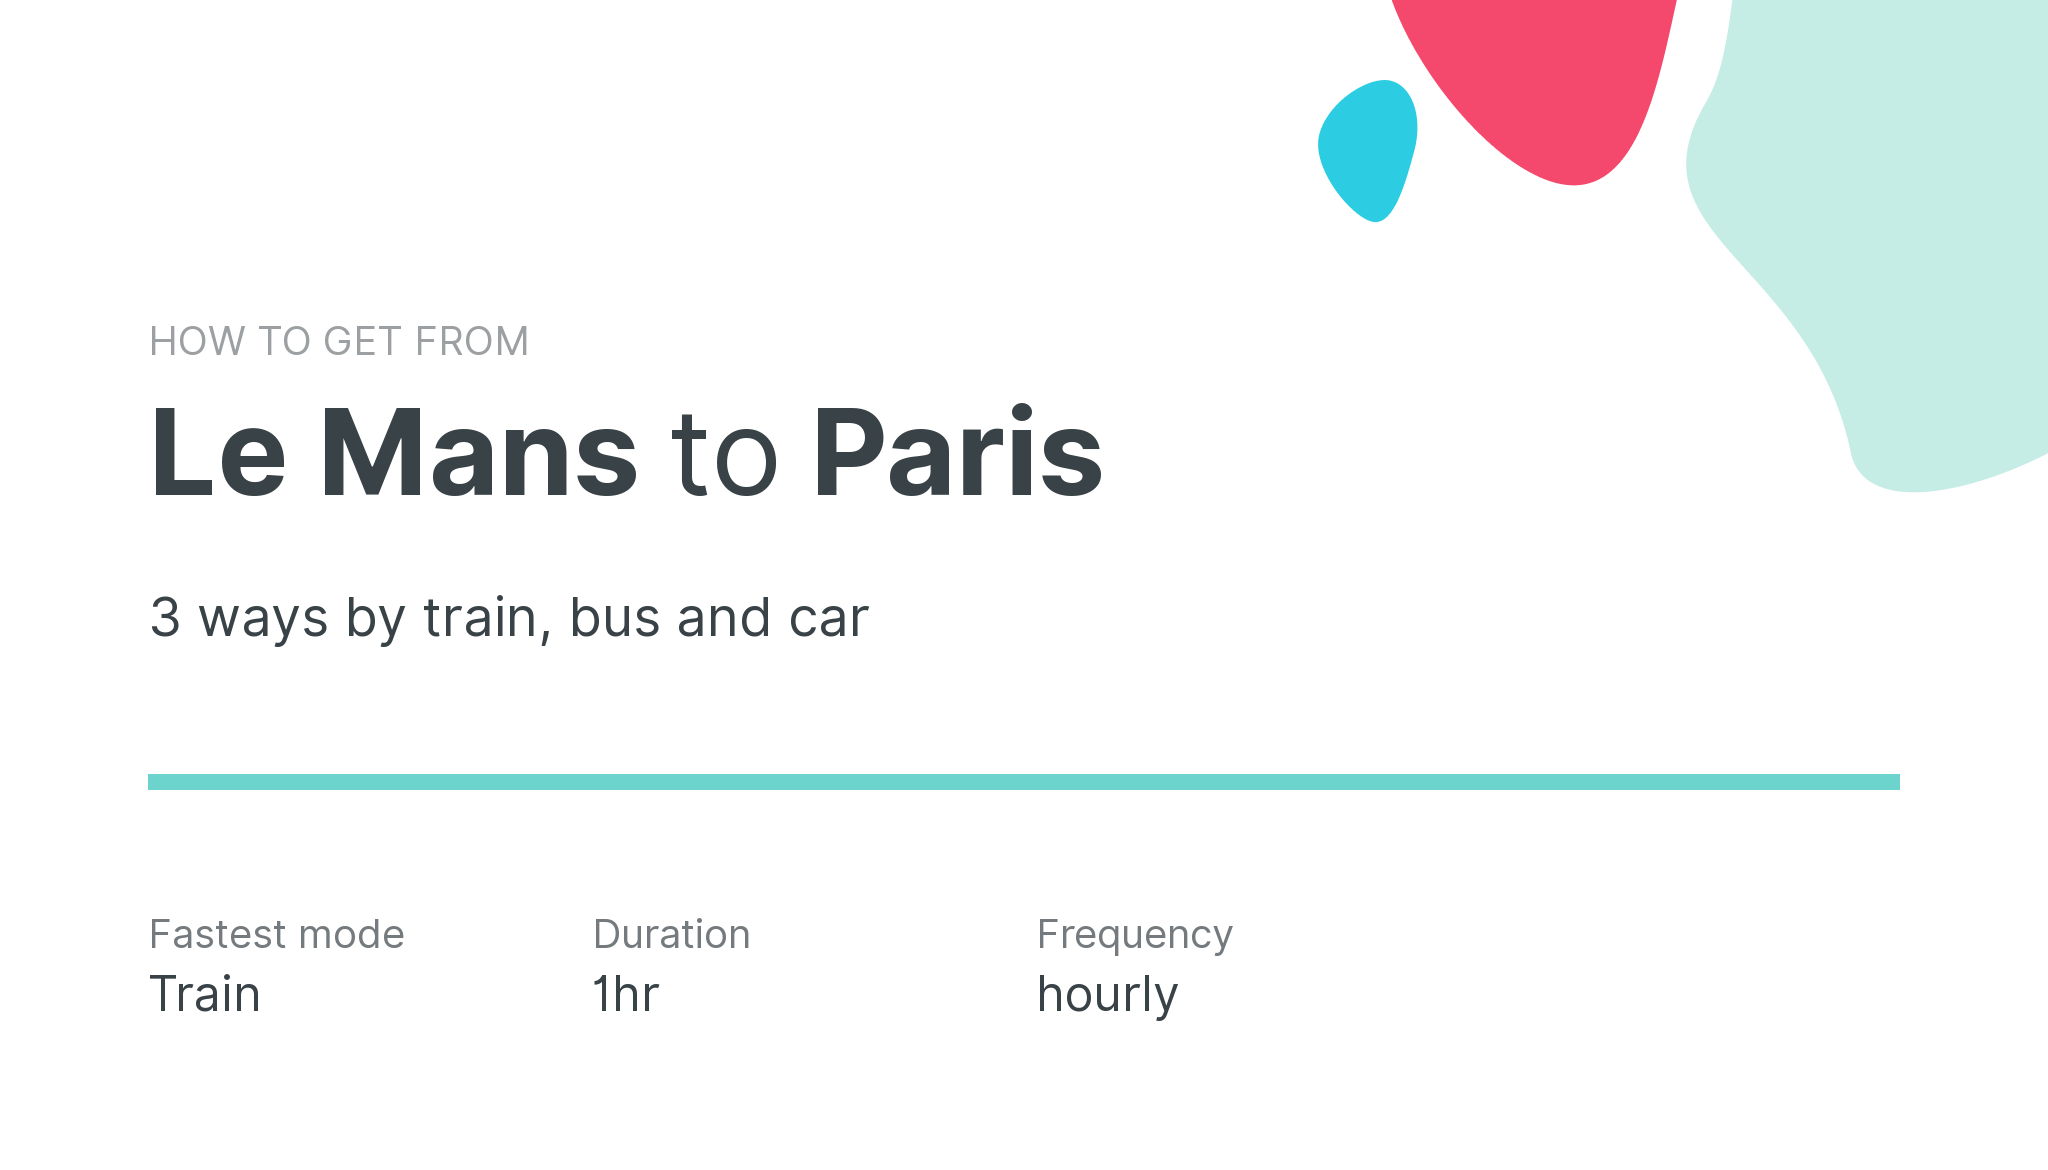 How do I get from Le Mans to Paris